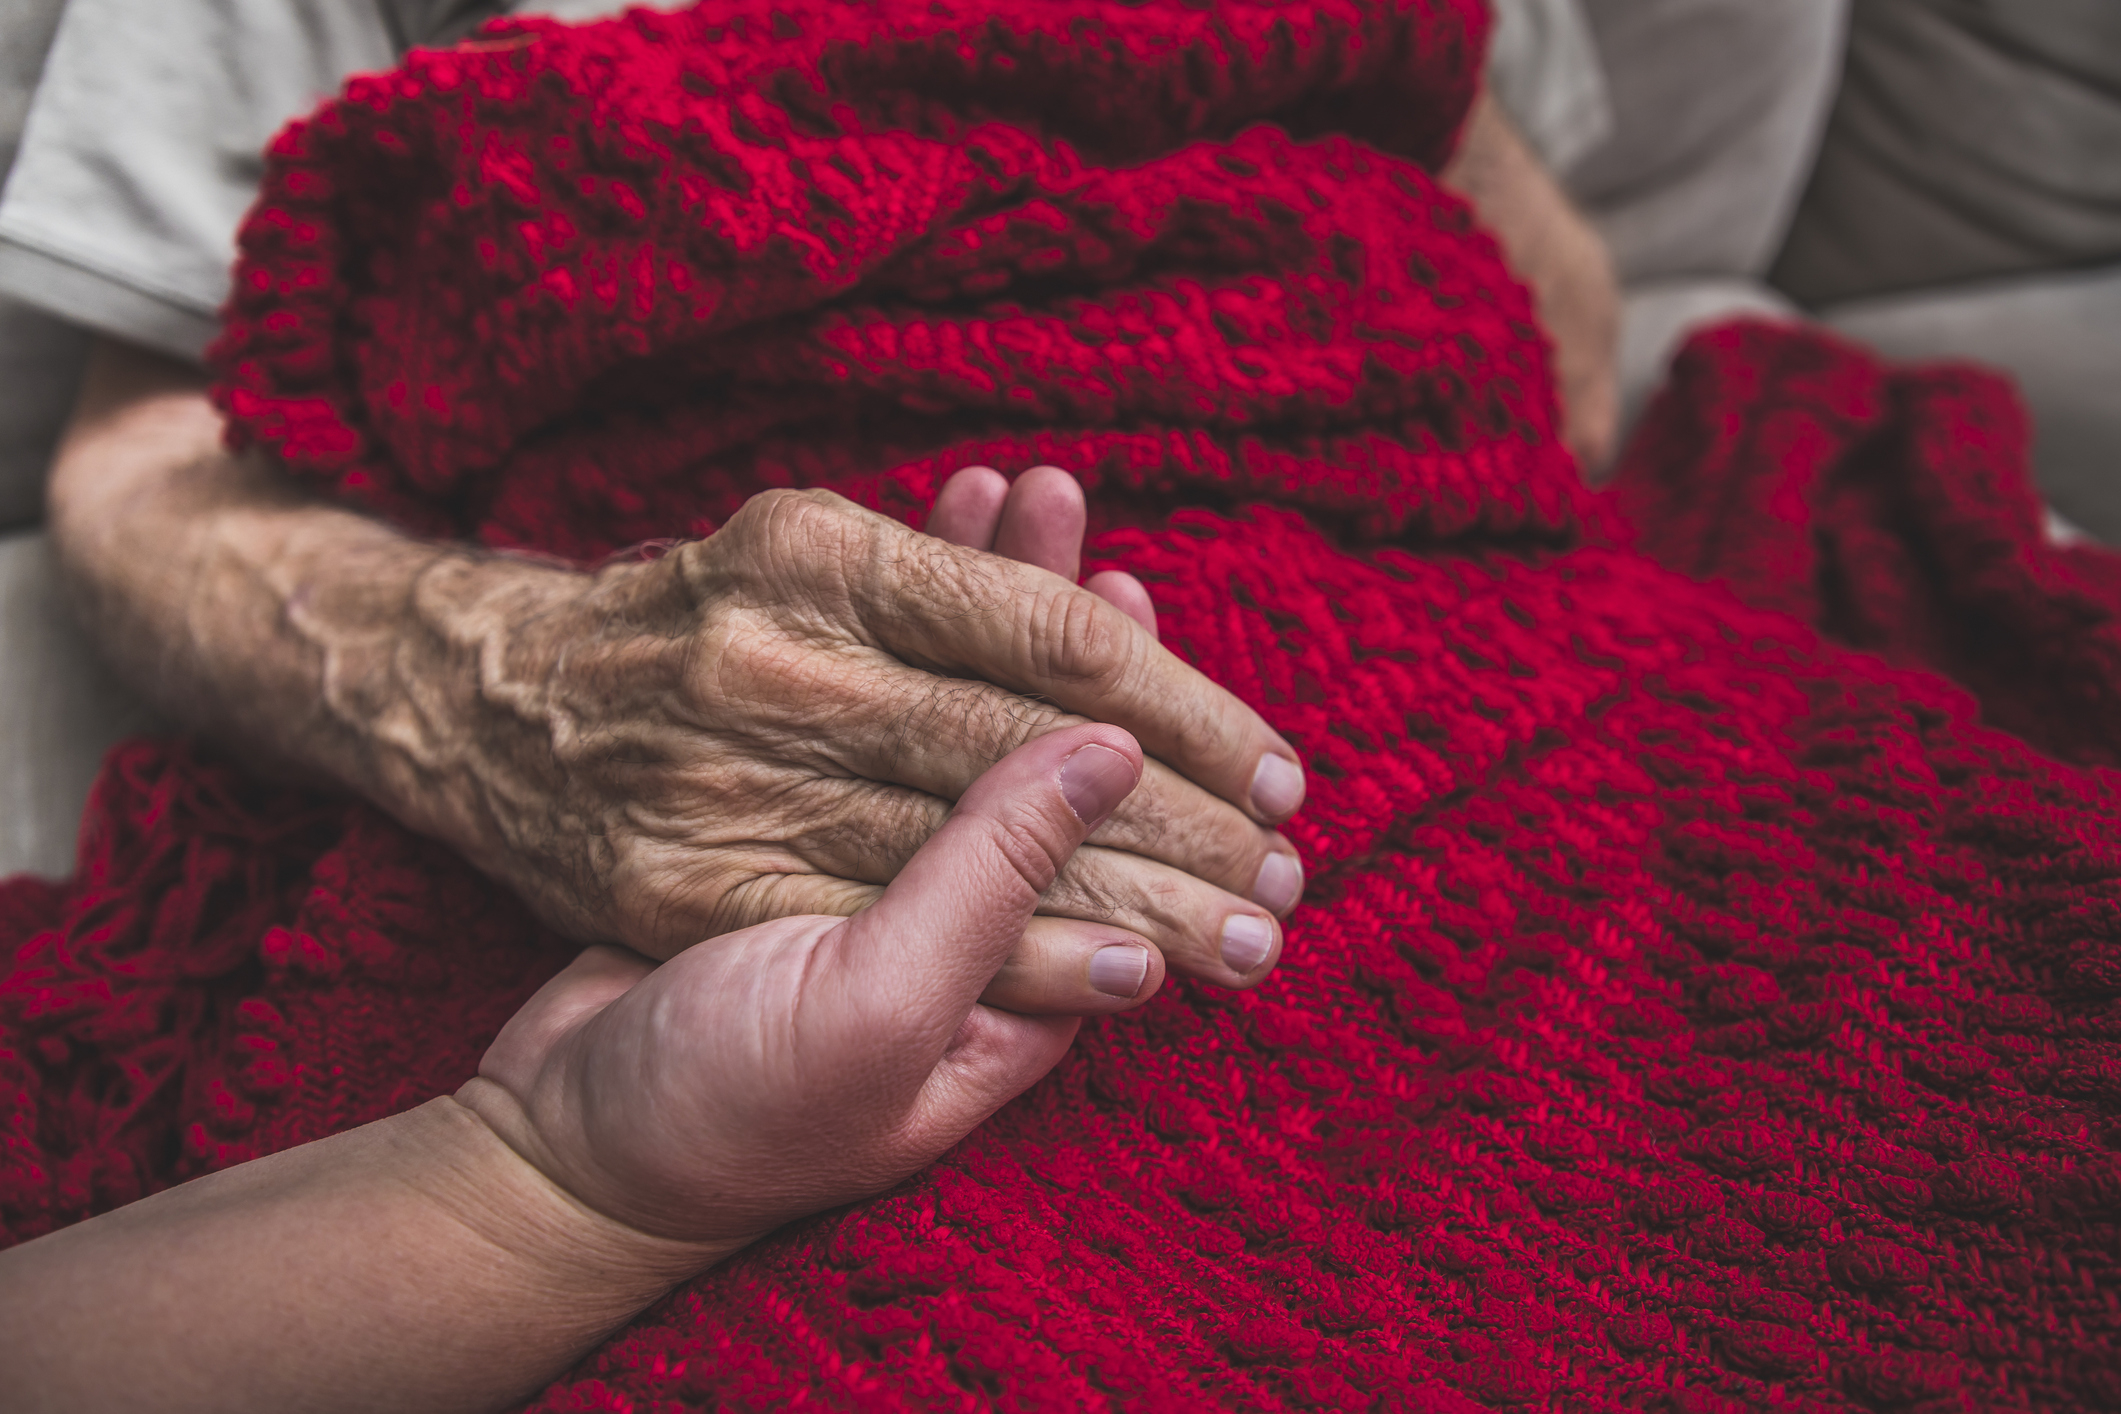 A younger person&#x27;s hand gently holding an older person&#x27;s hand over a red blanket